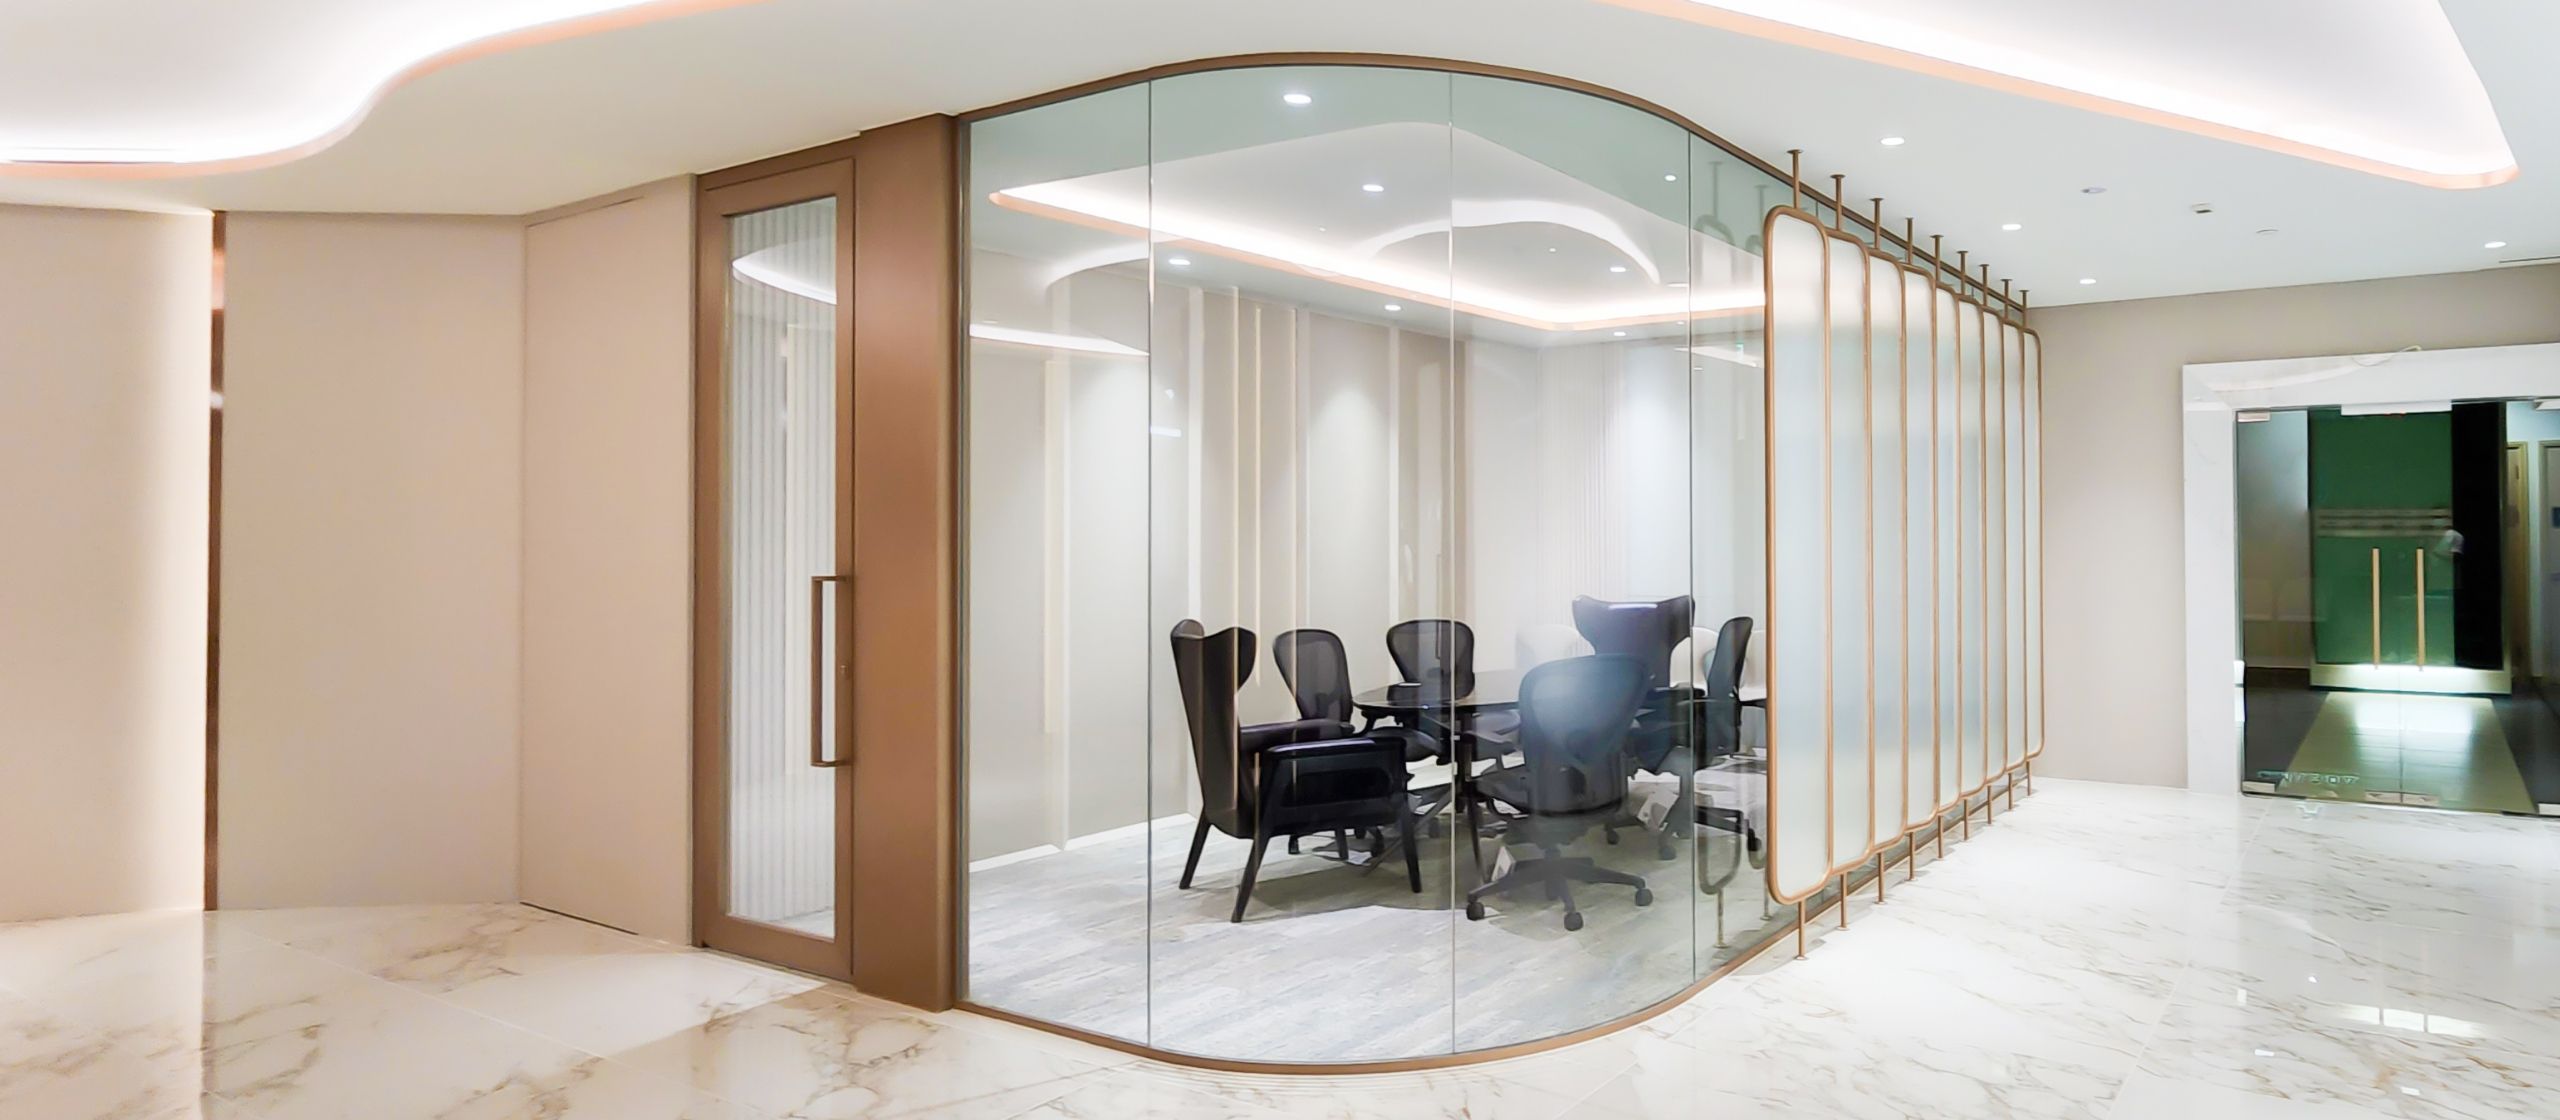 Single Glazed Partitioning with Curved Glass Design